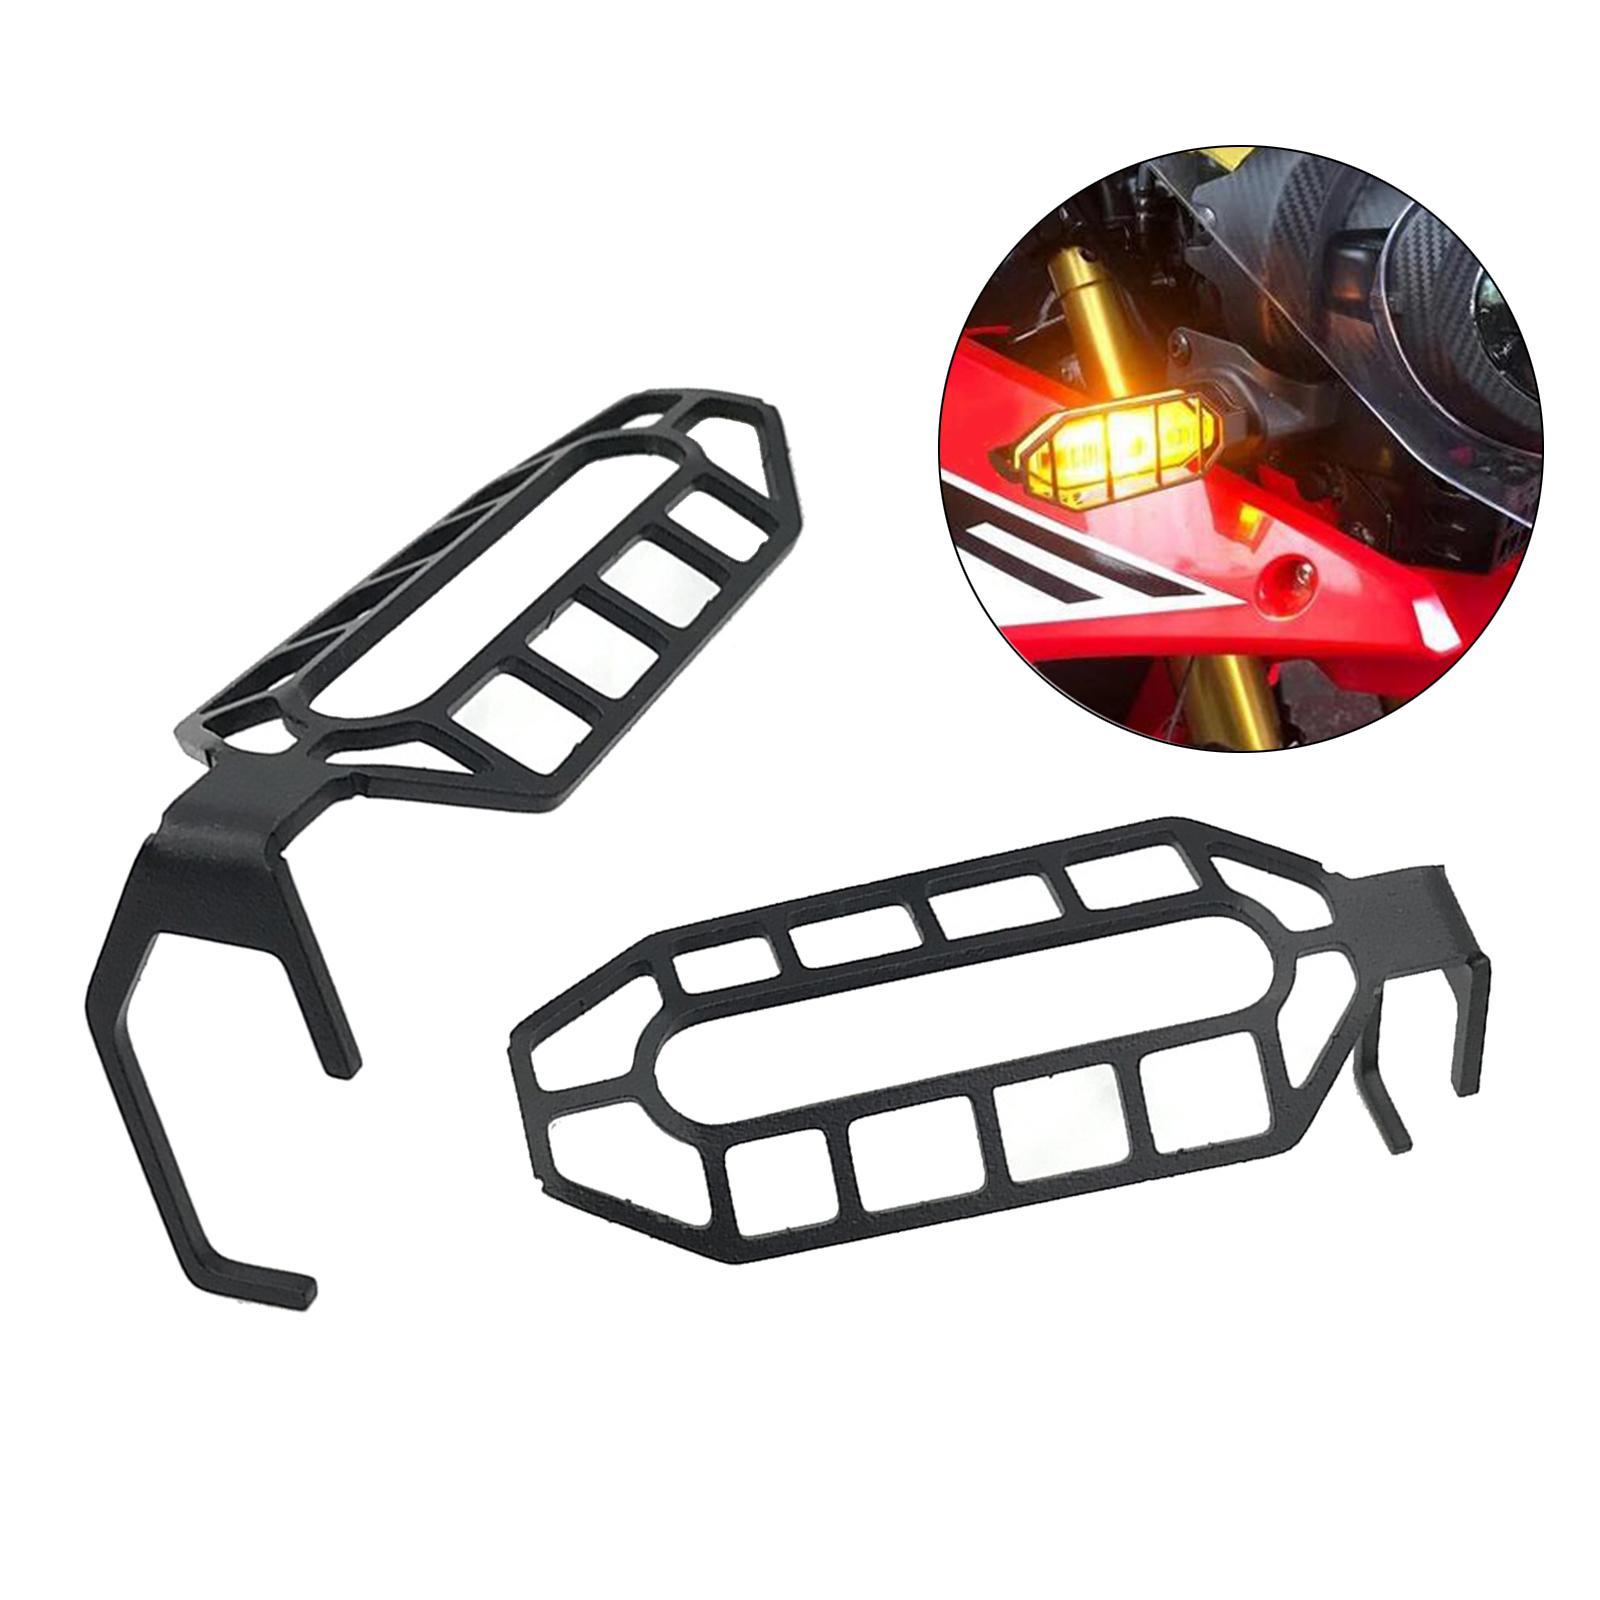 2xTurn Signal Light Protection Protector Cover for CB500X 2019 2020 2021